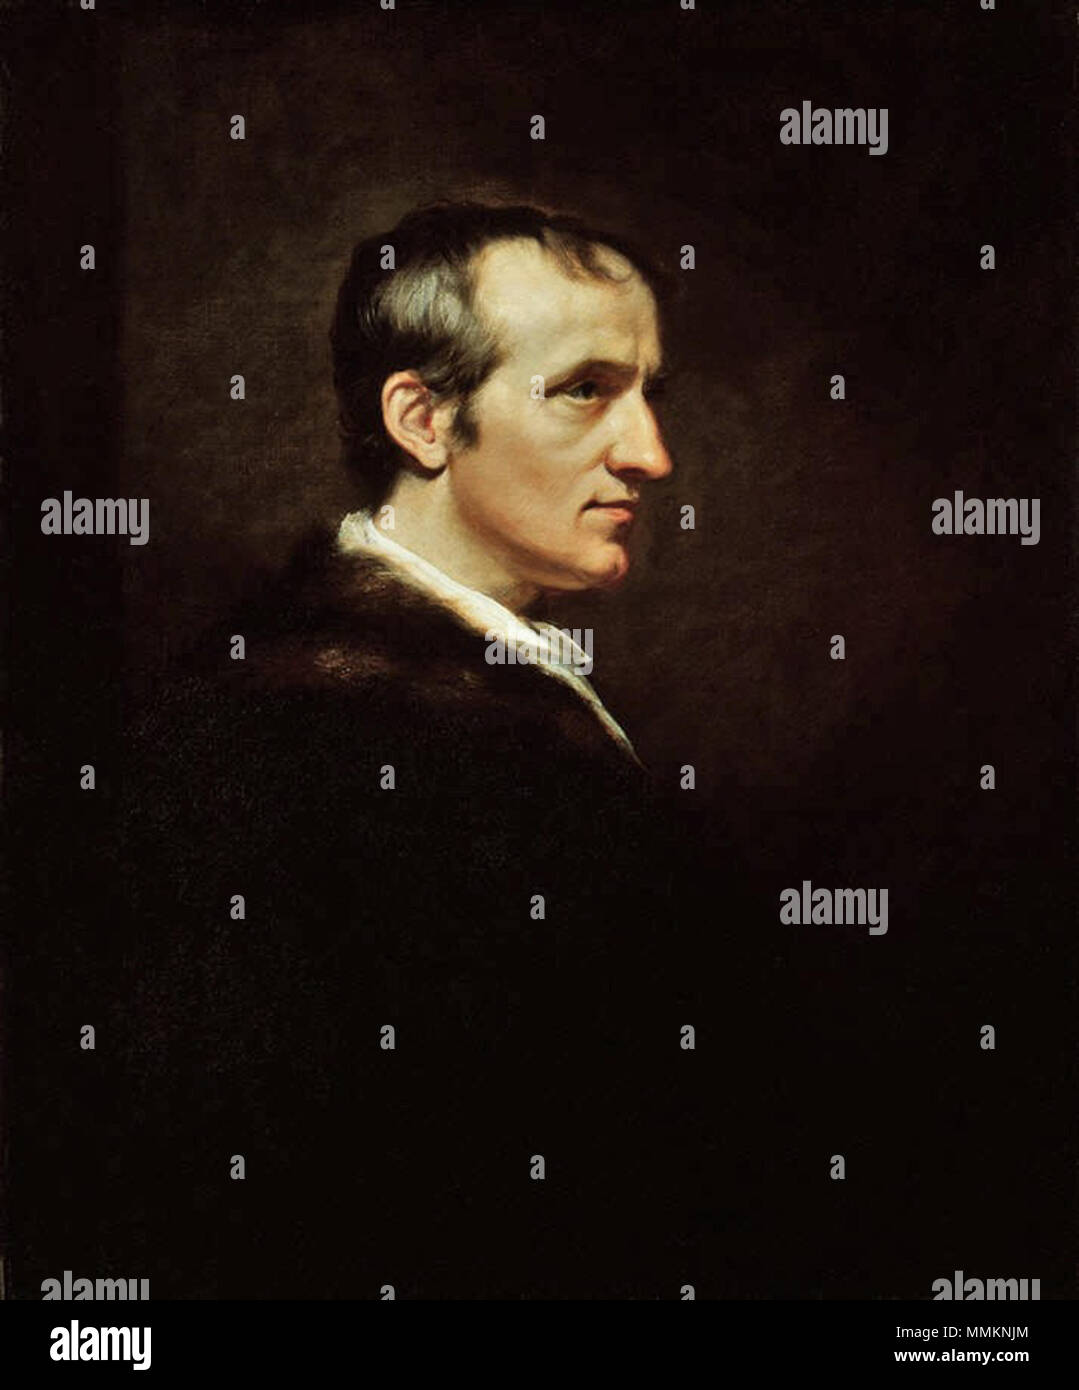 .  English: William Godwin, oil on canvas, 1802, 29 1/2 in. x 24 1/2 in. (749 mm x 622 mm), 'Godwin liked Northcote's portrait, describing it as 'The principal memorandum of my corporal existence that will remain after my death.' With the light hitting the philosopher's temples, Northcote symbolised Godwin's belief in progress based on reason.'  William Godwin. 1802. James Northcote (1746-1831) WilliamGodwin Stock Photo